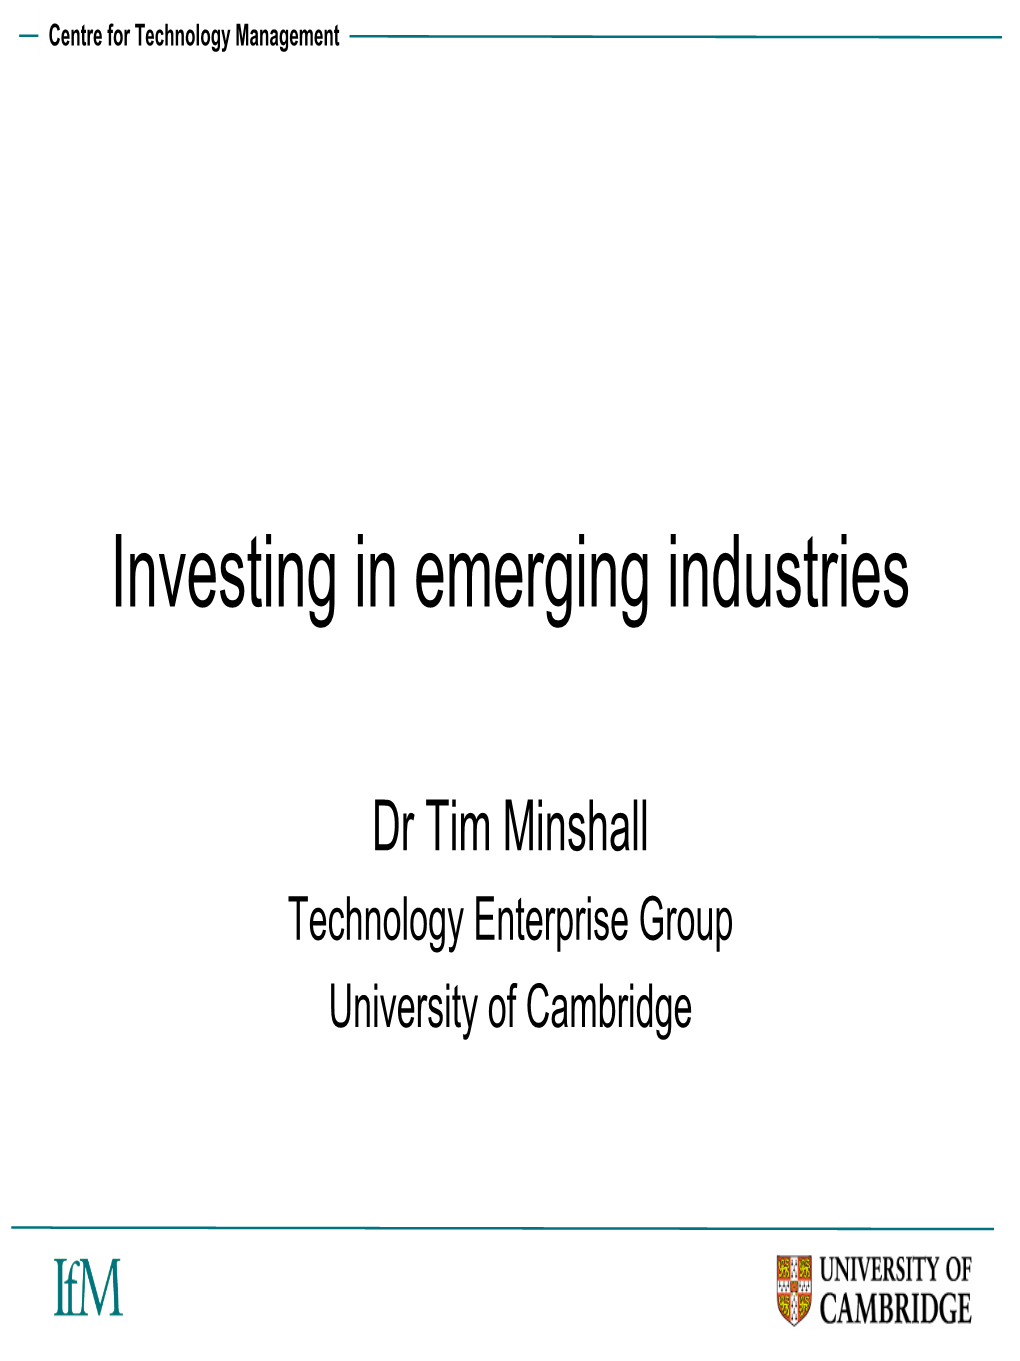 Investing in Emerging Industries